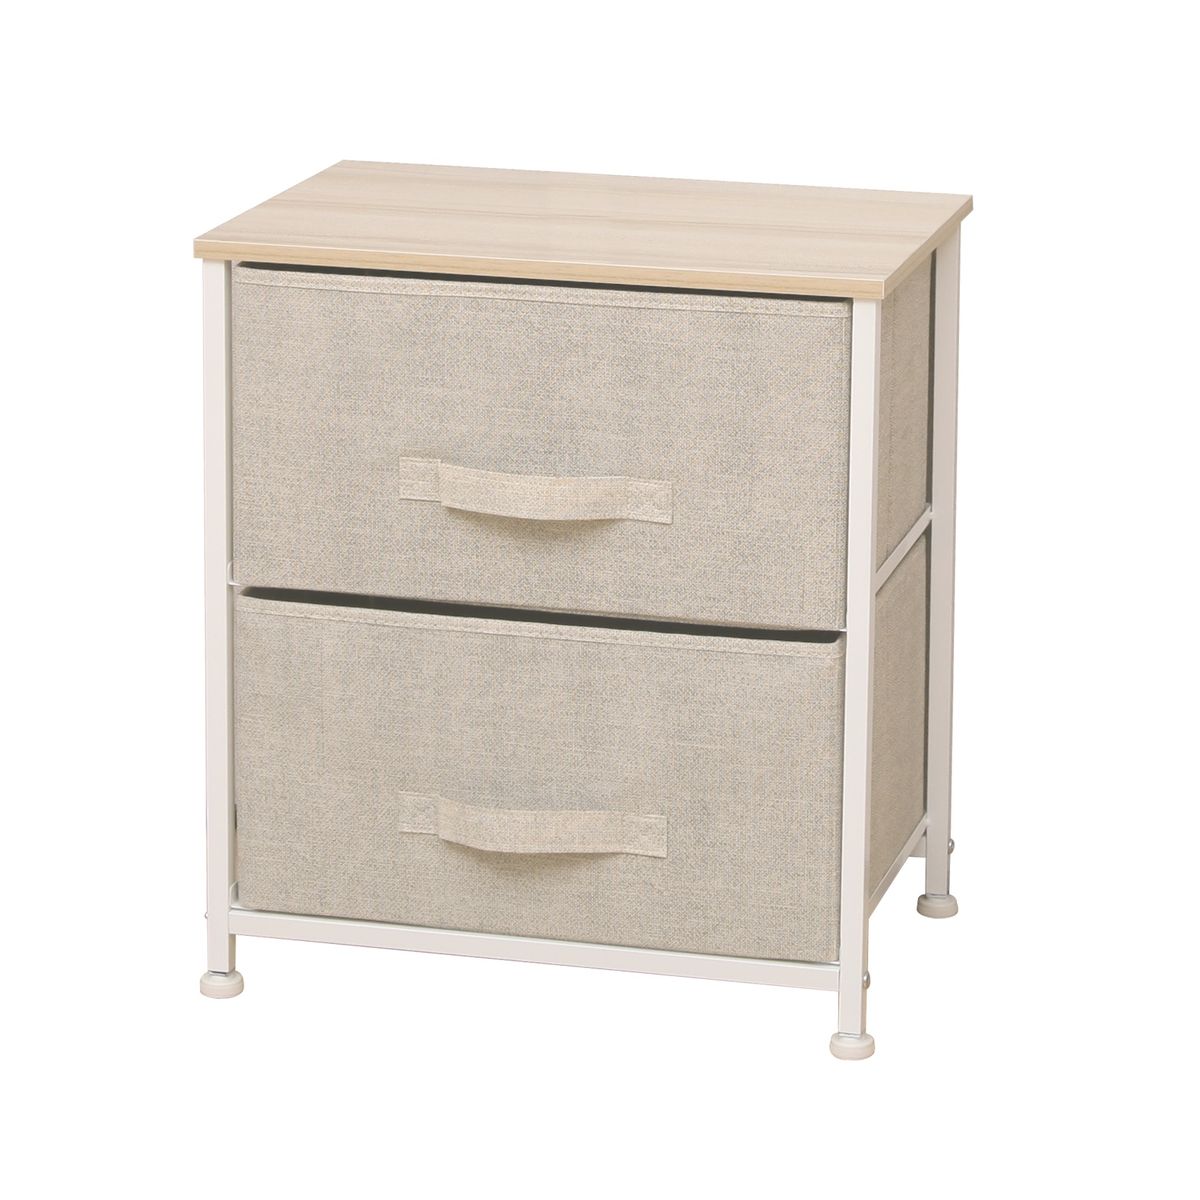 Photos - Wardrobe Private Label Foldable Storage Chest with Drawers - 2 drawers KDC-011